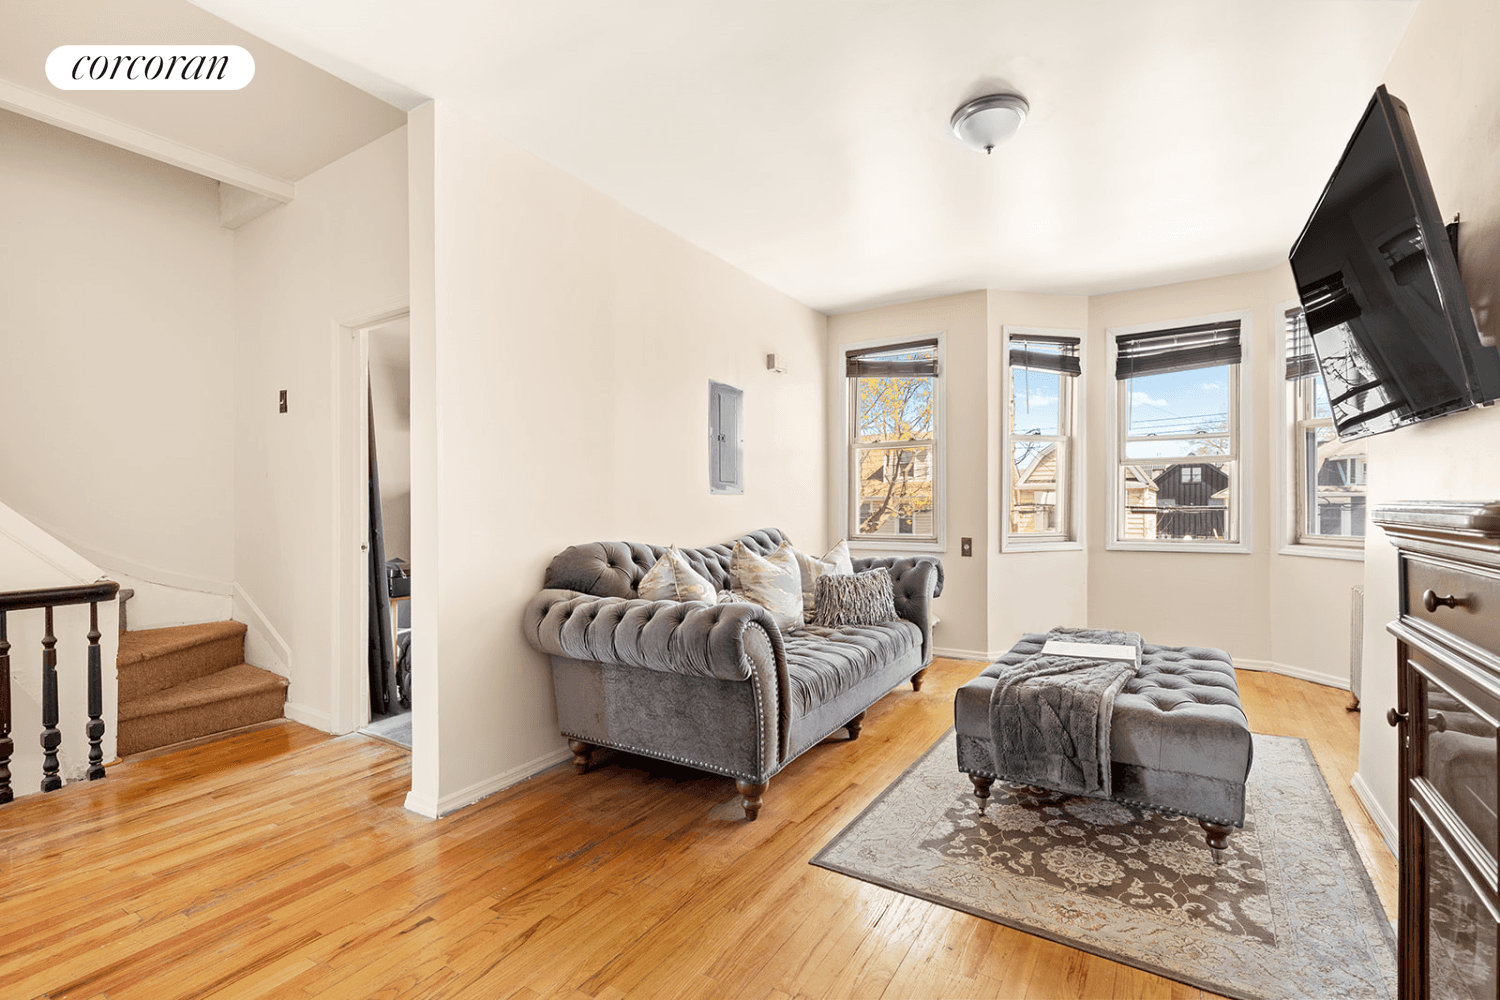 Welcome to 630 E 51st, a spacious rental property located in East Flatbush, Brooklyn.